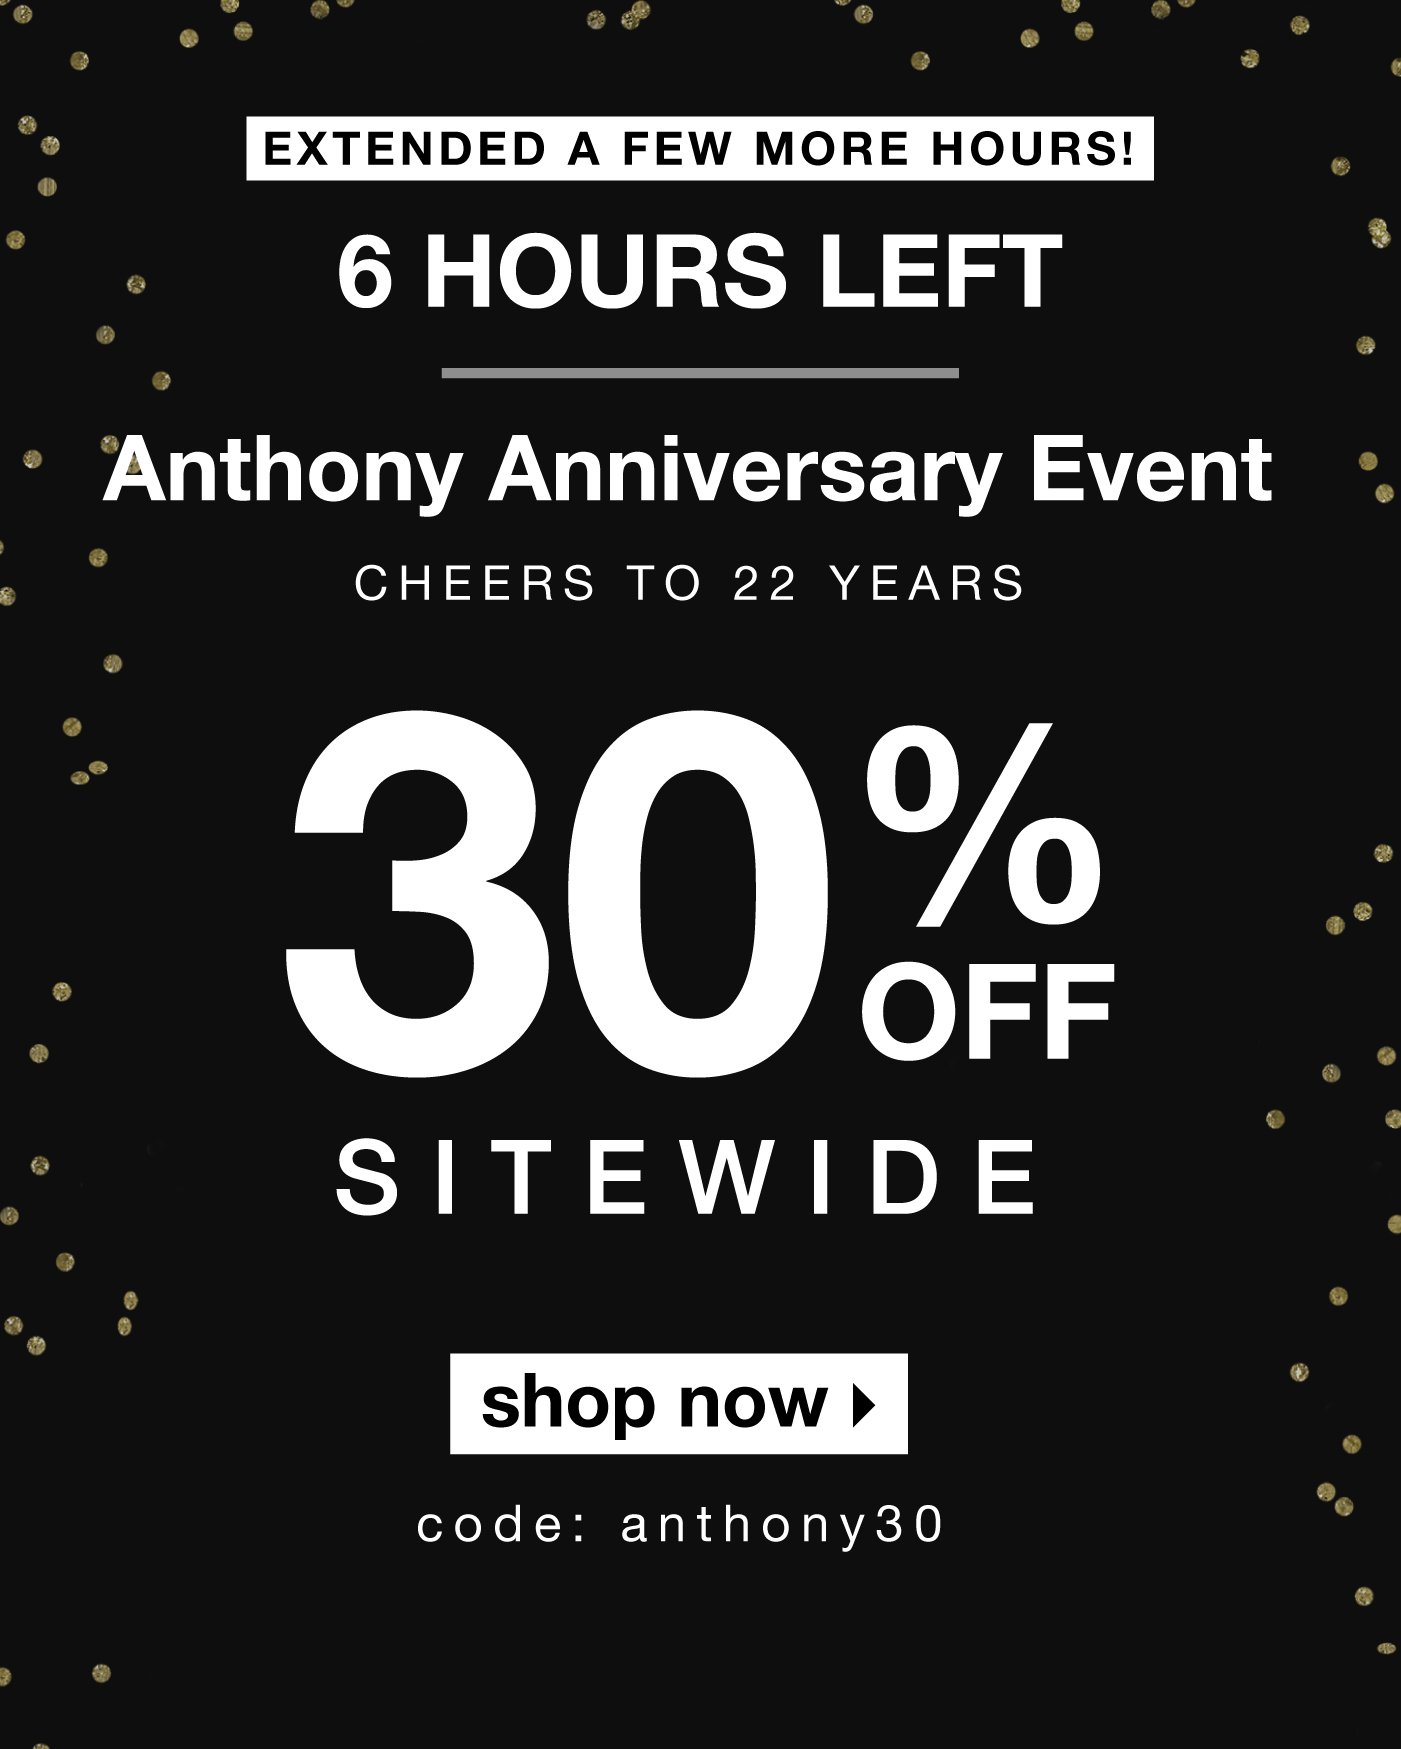 ends tonight 30% off sitewide- Use code Anthony30